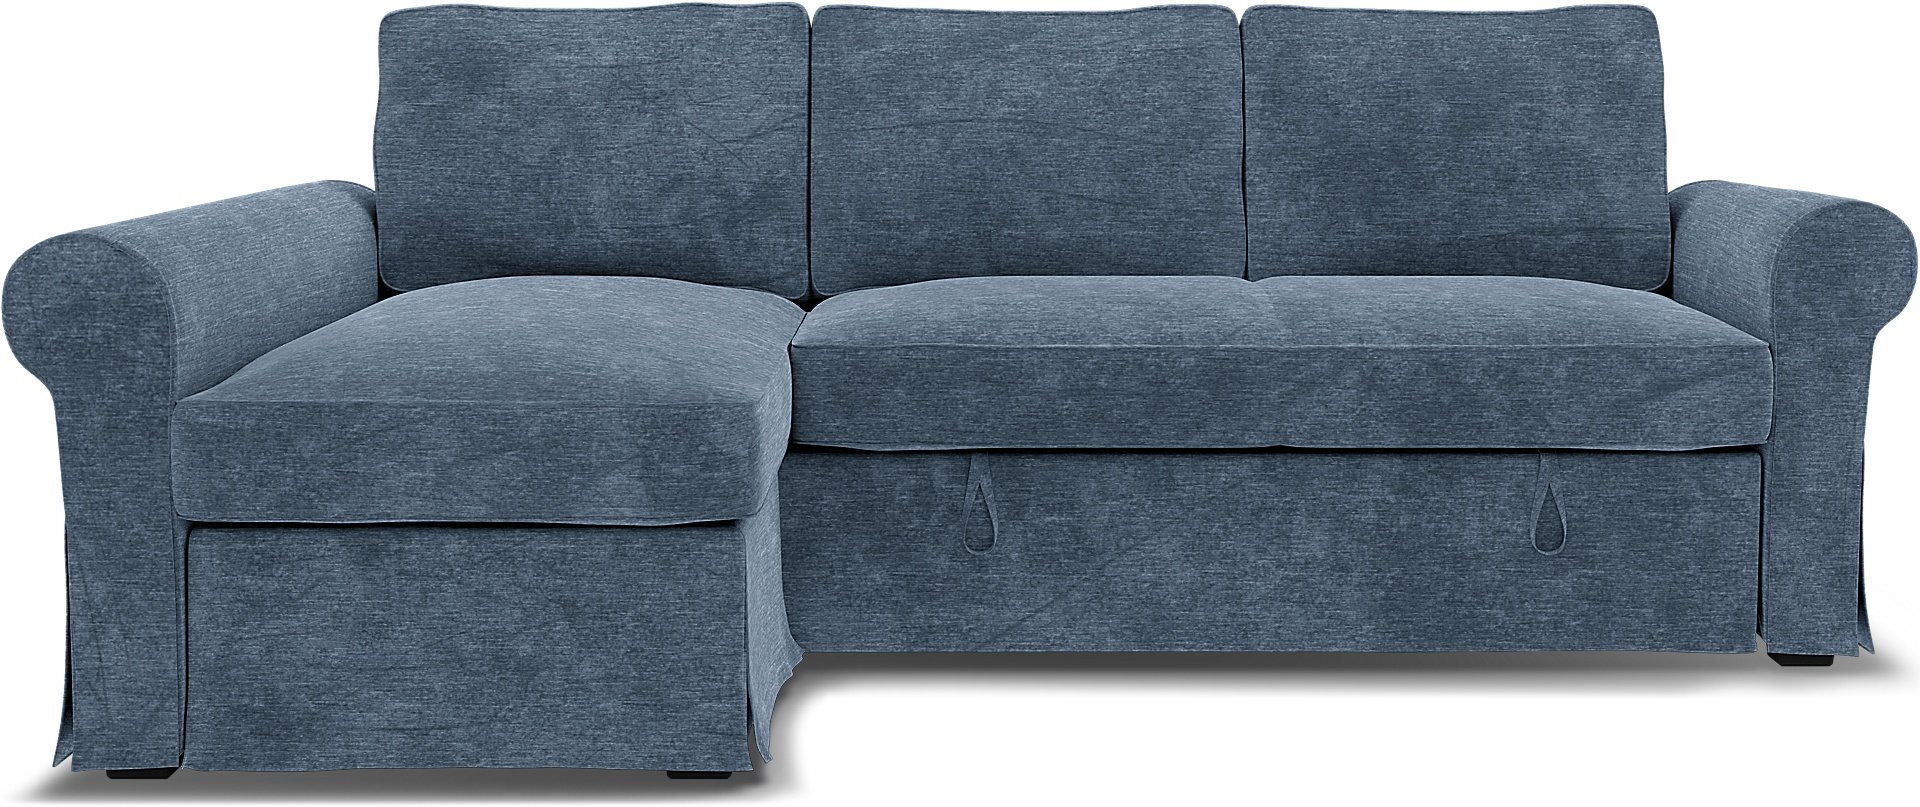 IKEA - Backabro Sofabed with Chaise Cover, Mineral Blue, Velvet - Bemz